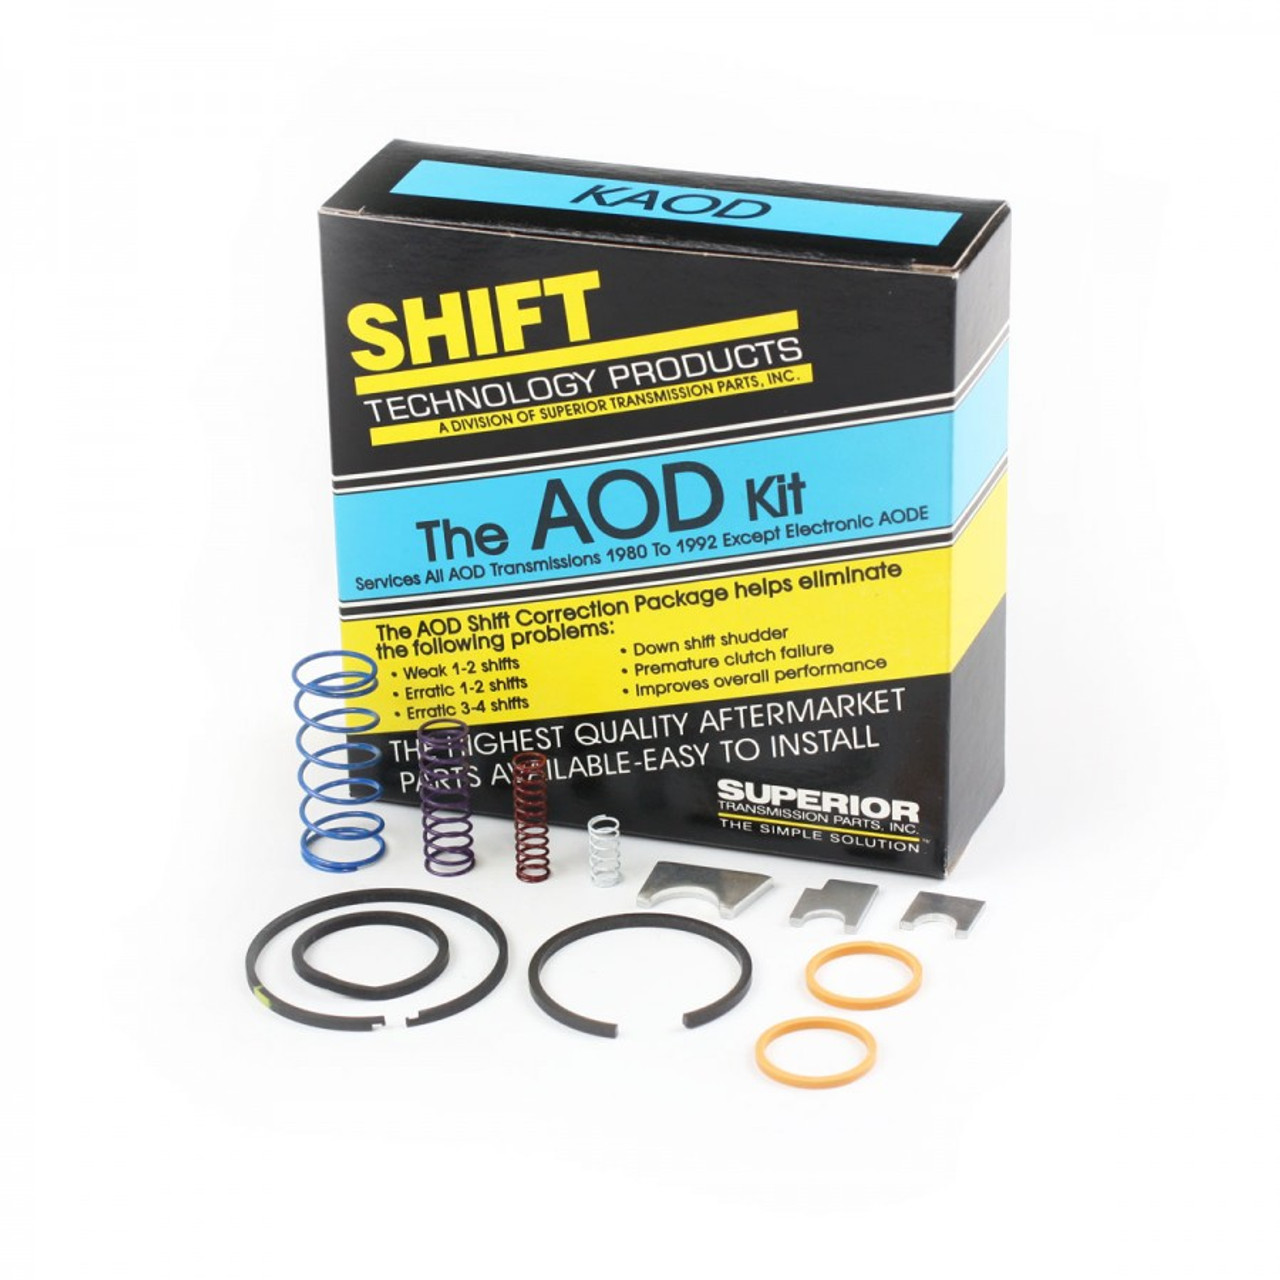 Ford AOD Transmission Shift Correction Kit by Superior